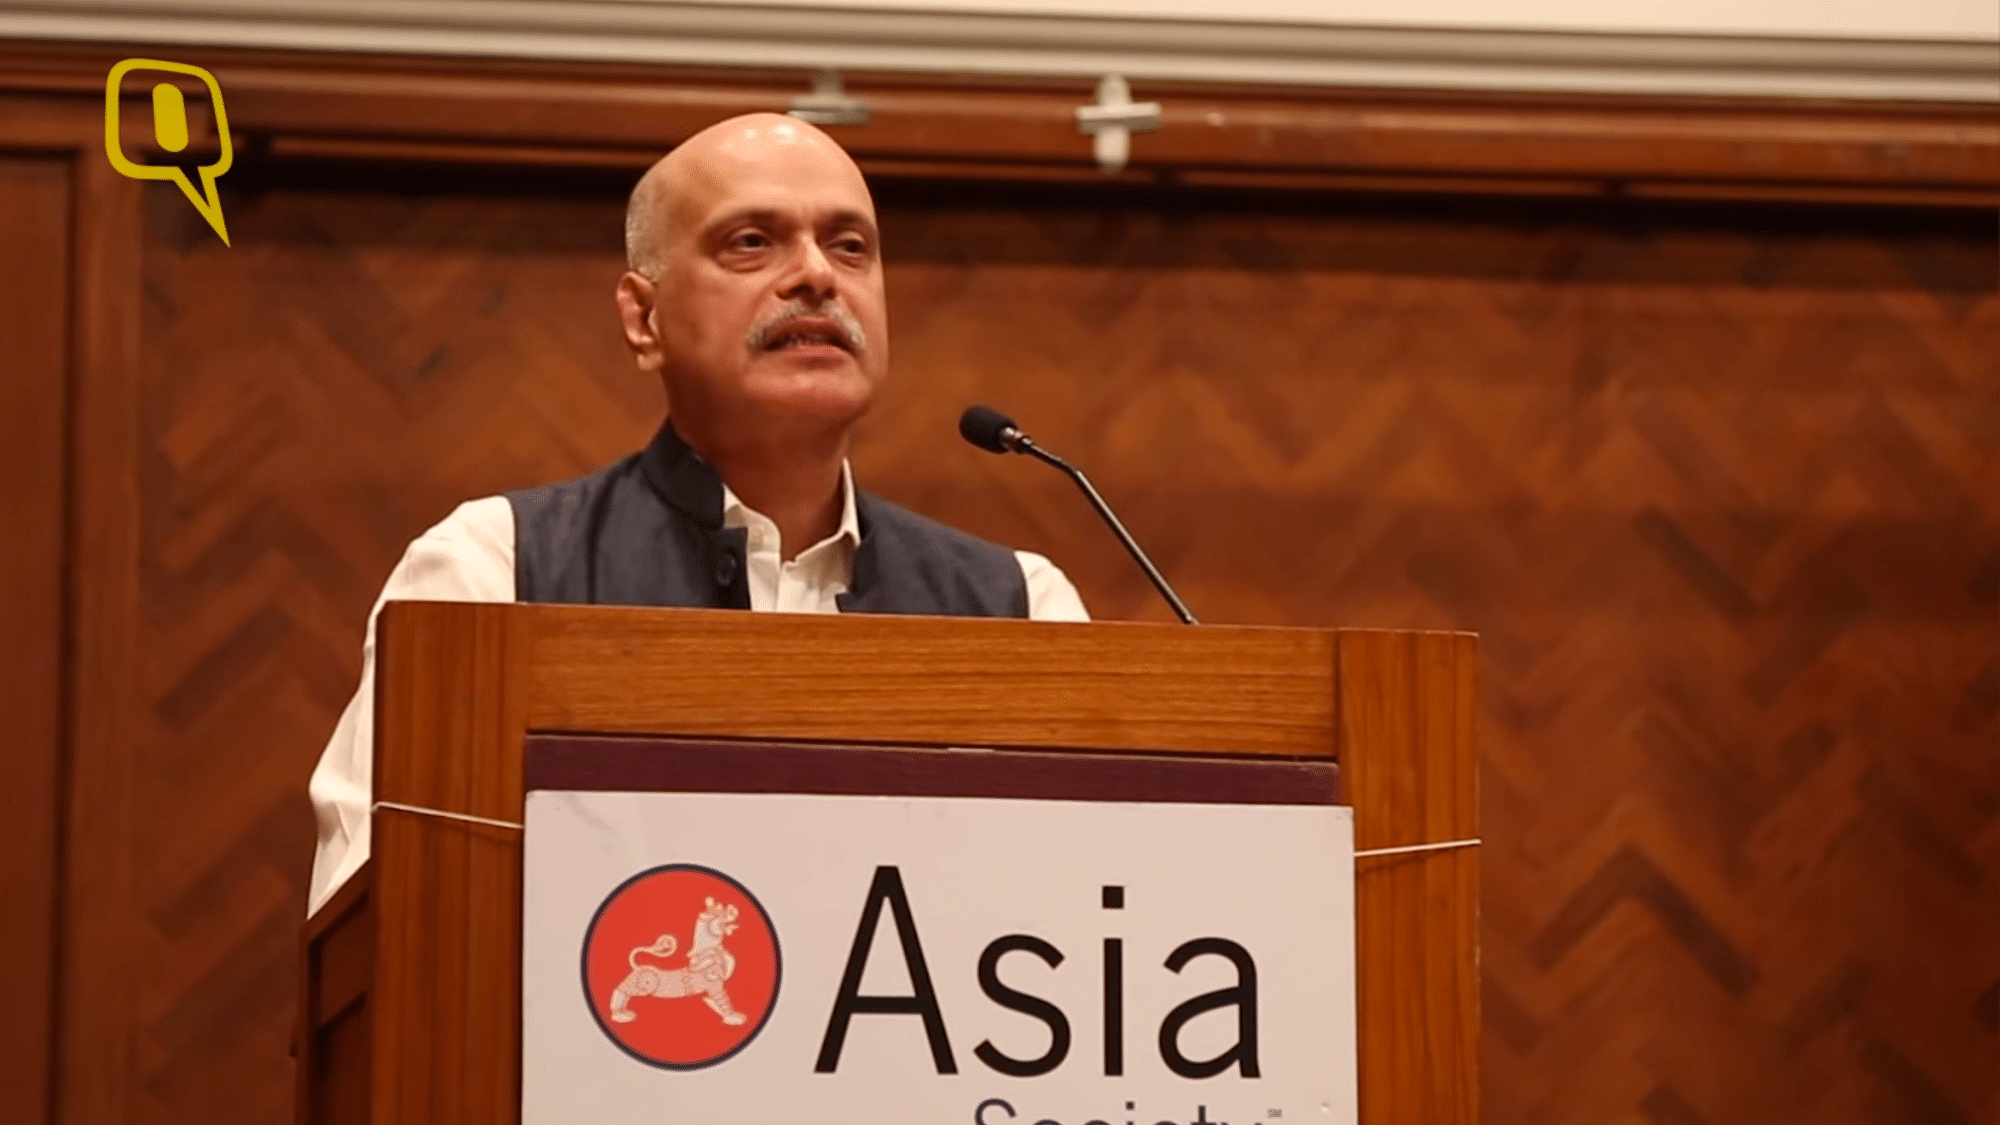 Raghav Bahl explains his vision of India as a SuperEconomy at a discussion hosted by The Asia Society, Mumbai